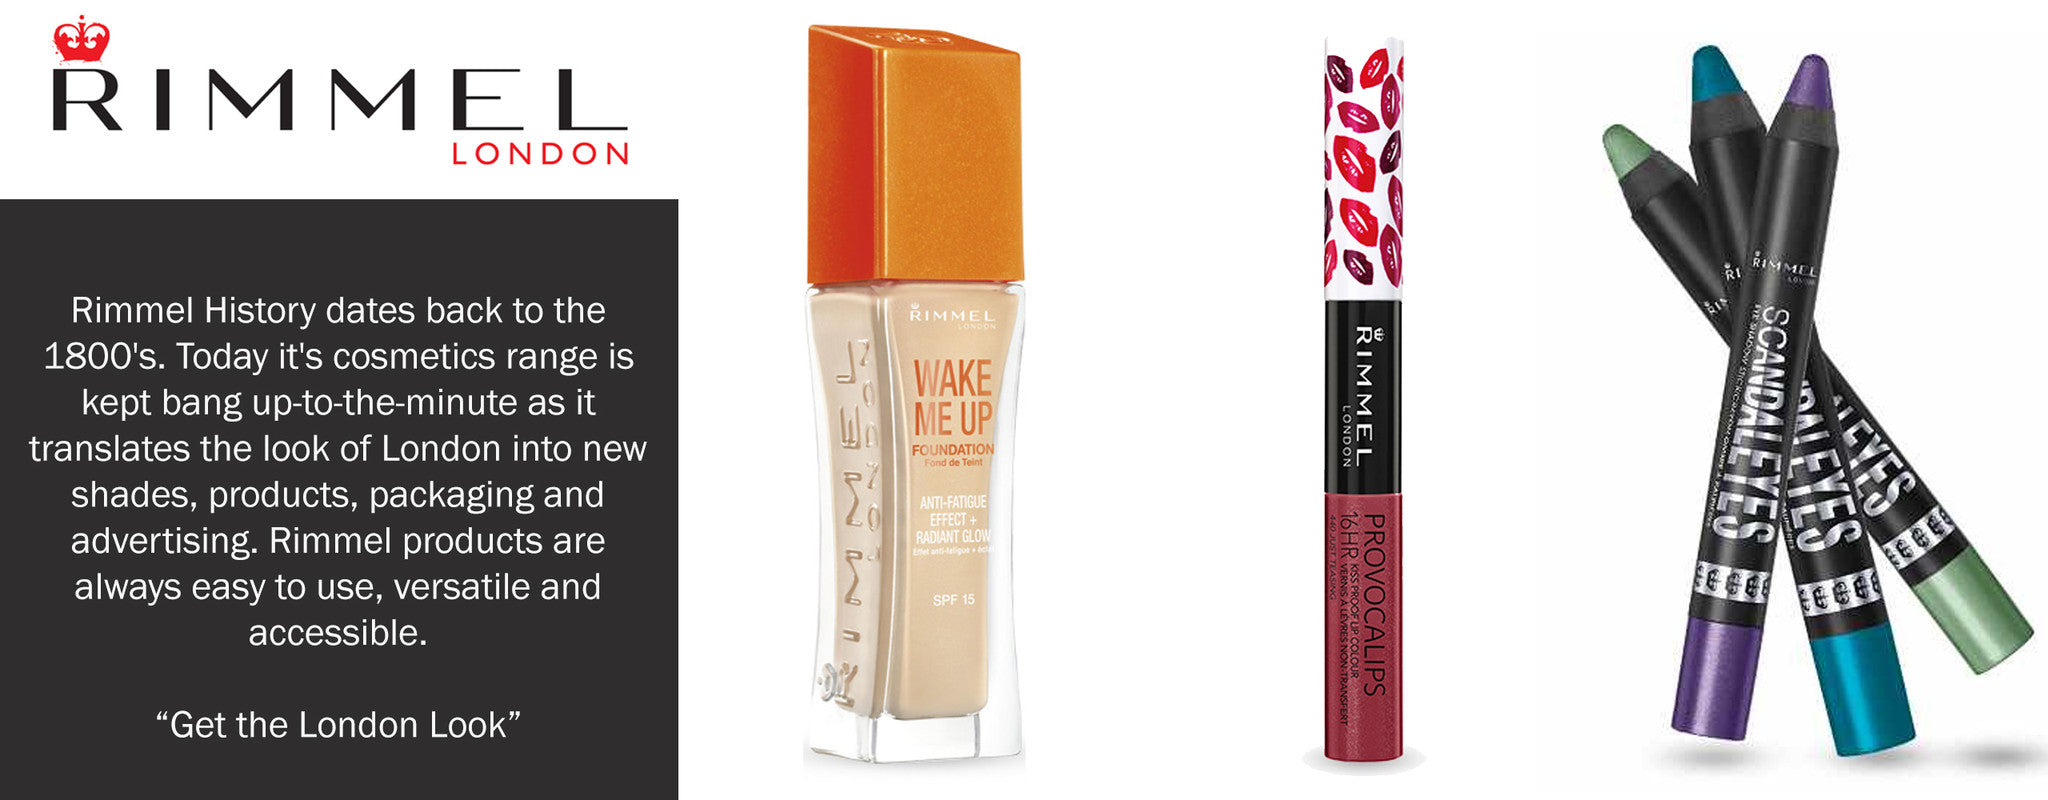 Rimmel Collection Image